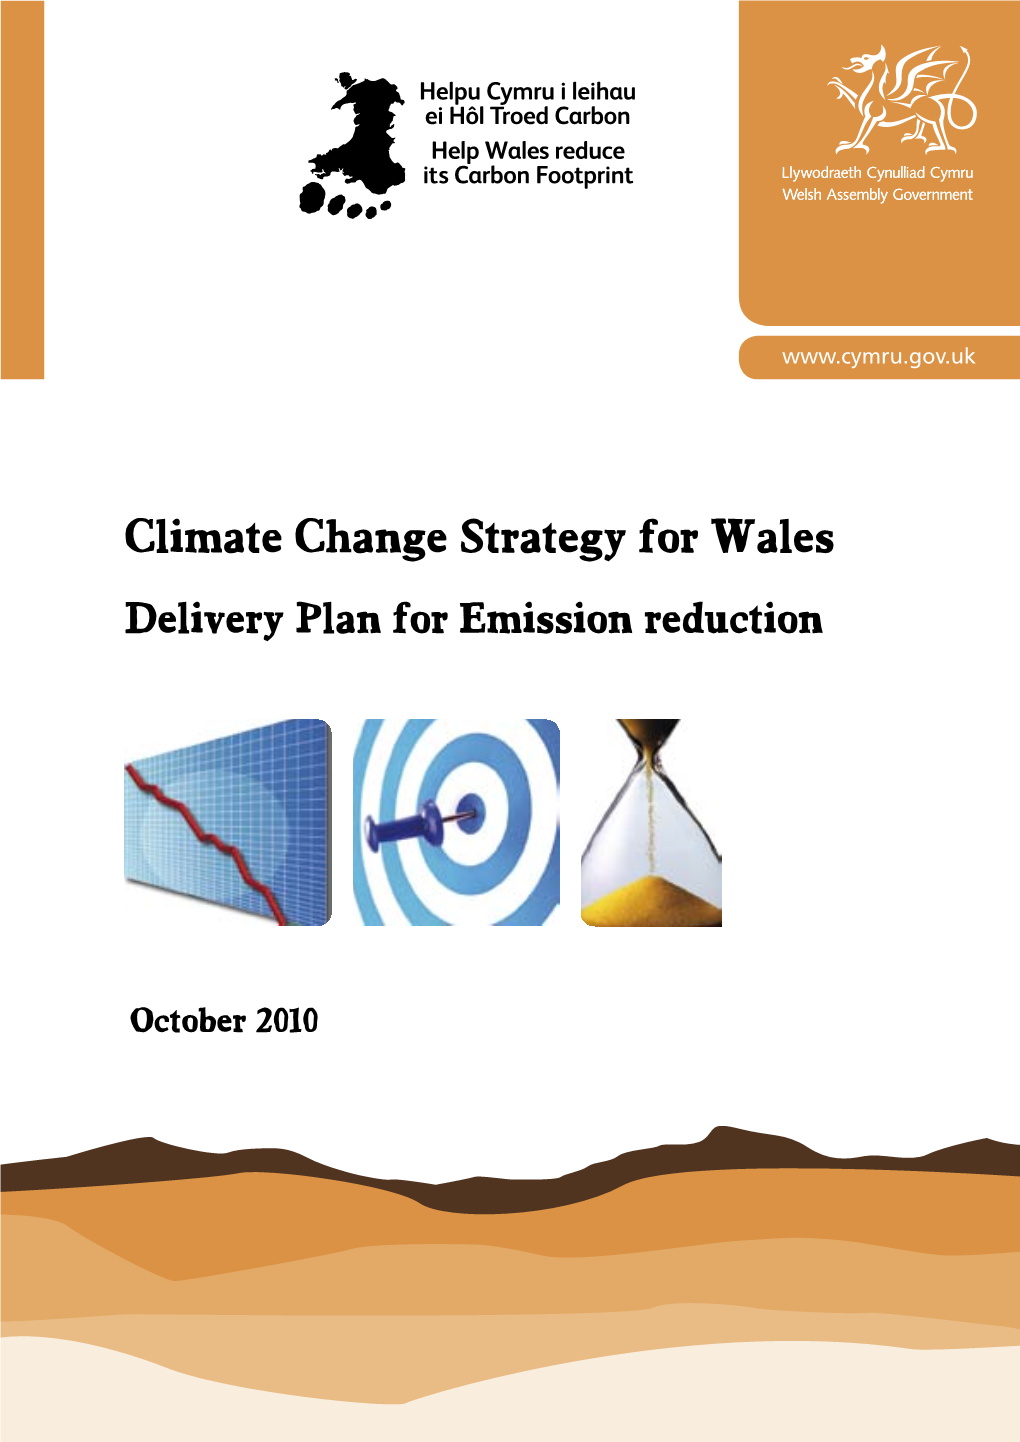 Climate Change Strategy for Wales Delivery Plan for Emission Reduction